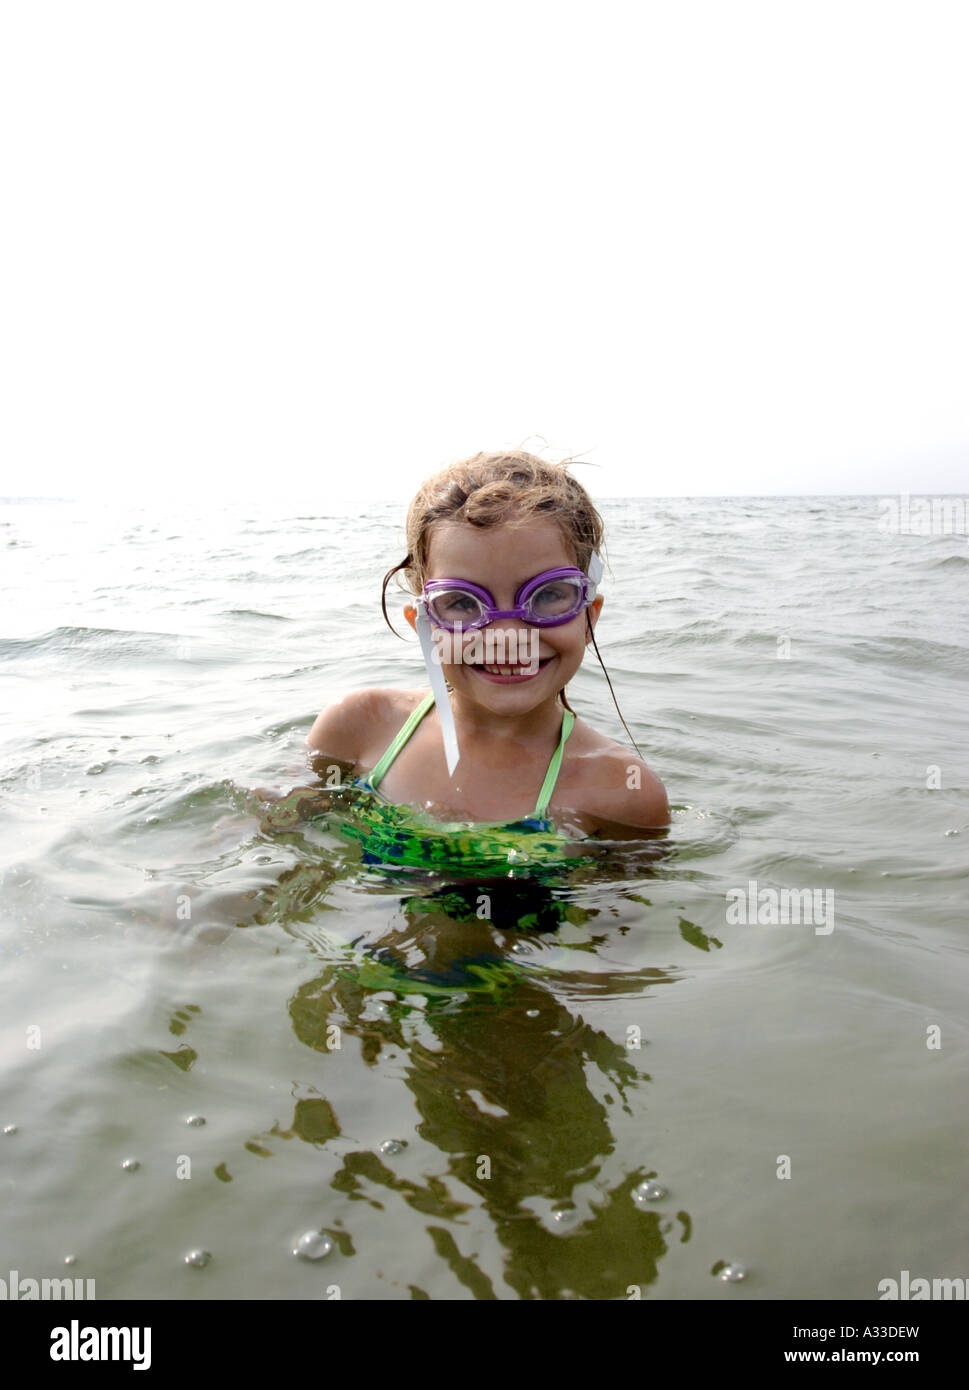 Young Girl With Sandy Blond Hair With Green Swimsuit Purple